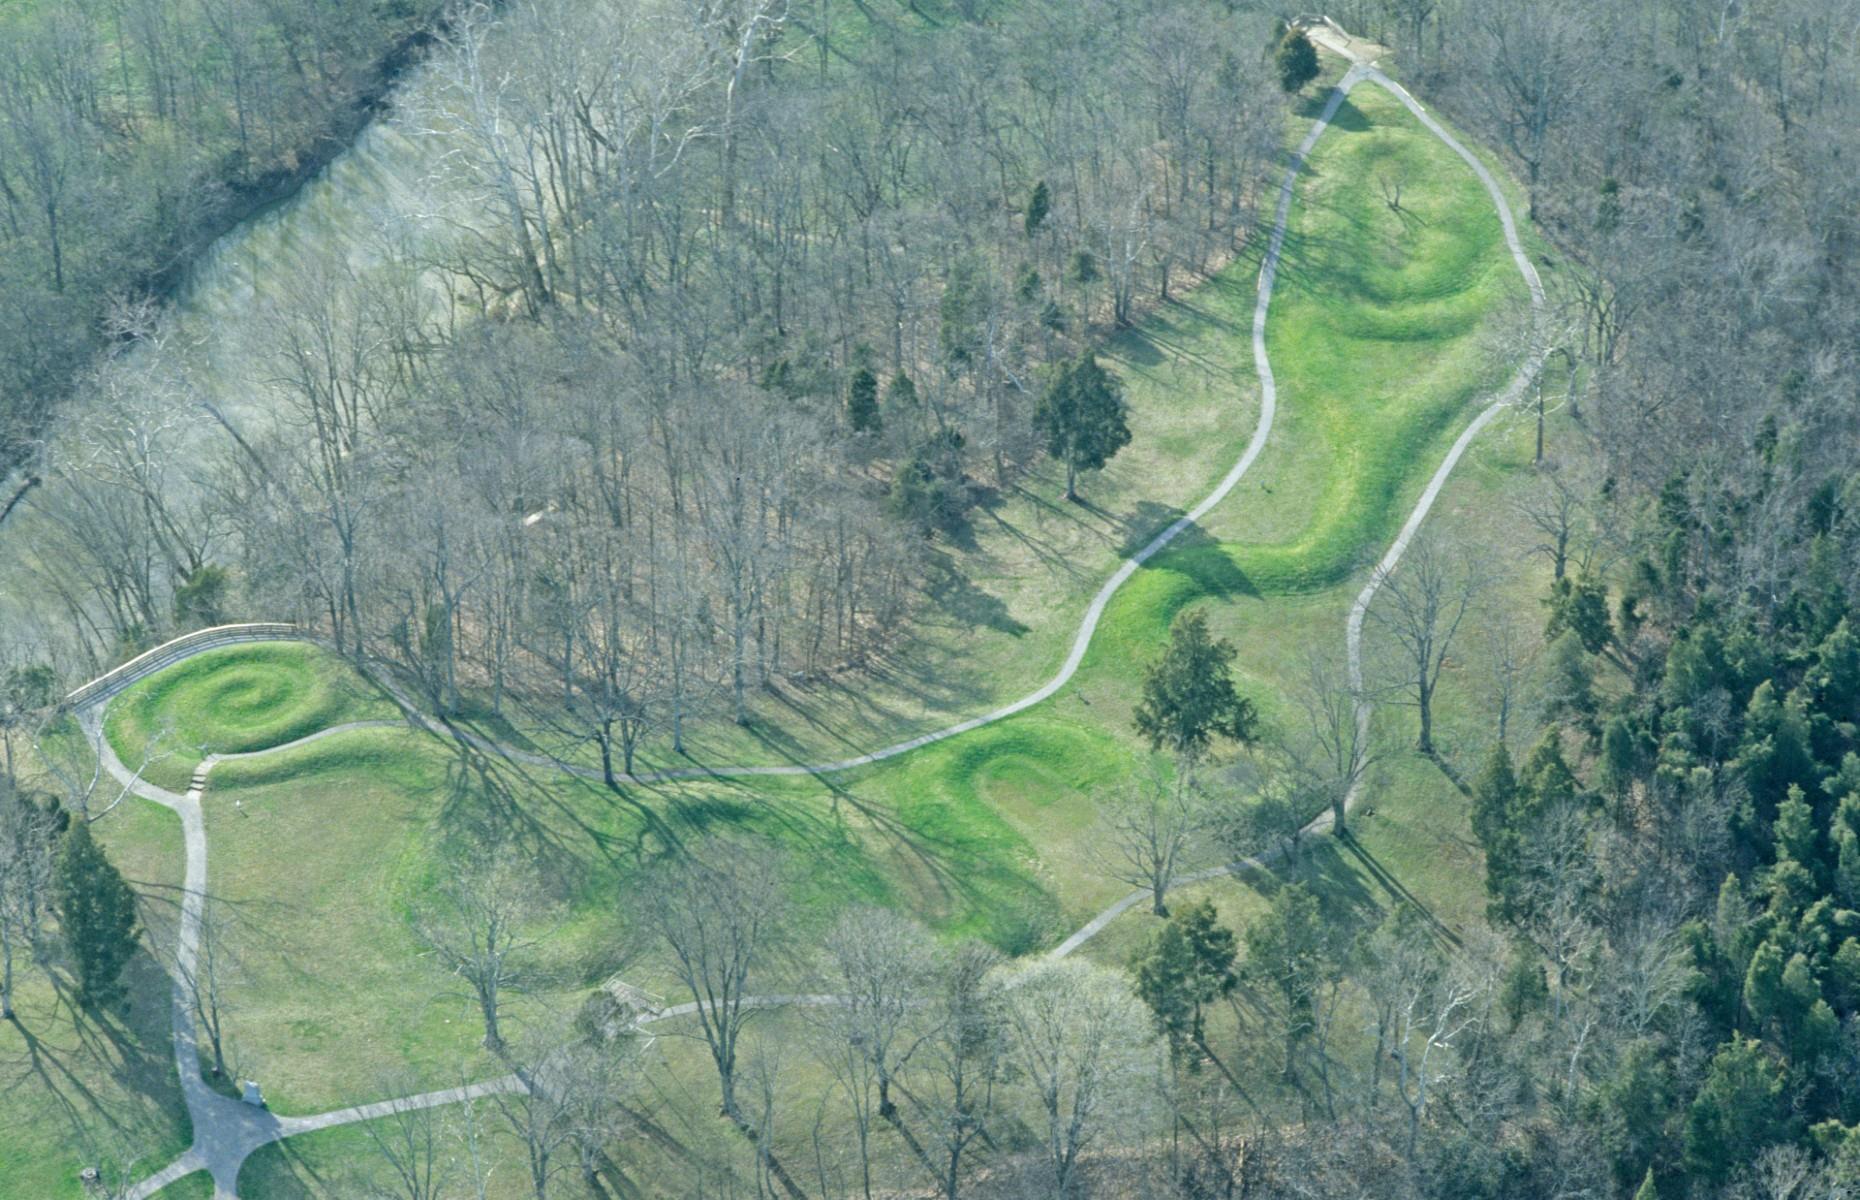 <p>Ohio is another state peppered with ancient mounds. Today, <a href="https://www.hmdb.org/m.asp?m=174985">six remaining mounds</a> make up the Wolf Plains in Athens, built by the Adena culture between 800 BC and AD 100. This area was a center of activity in ancient times, with everything from sports enclosures to spiritual sites. Other mounds in Ohio have similar dates; the legendary Great Serpent Mound (pictured) in Peebles, created from around 800 BC, is <a href="https://www.metmuseum.org/toah/hd/serp/hd_serp.htm">the world’s largest serpent effigy</a>.</p>